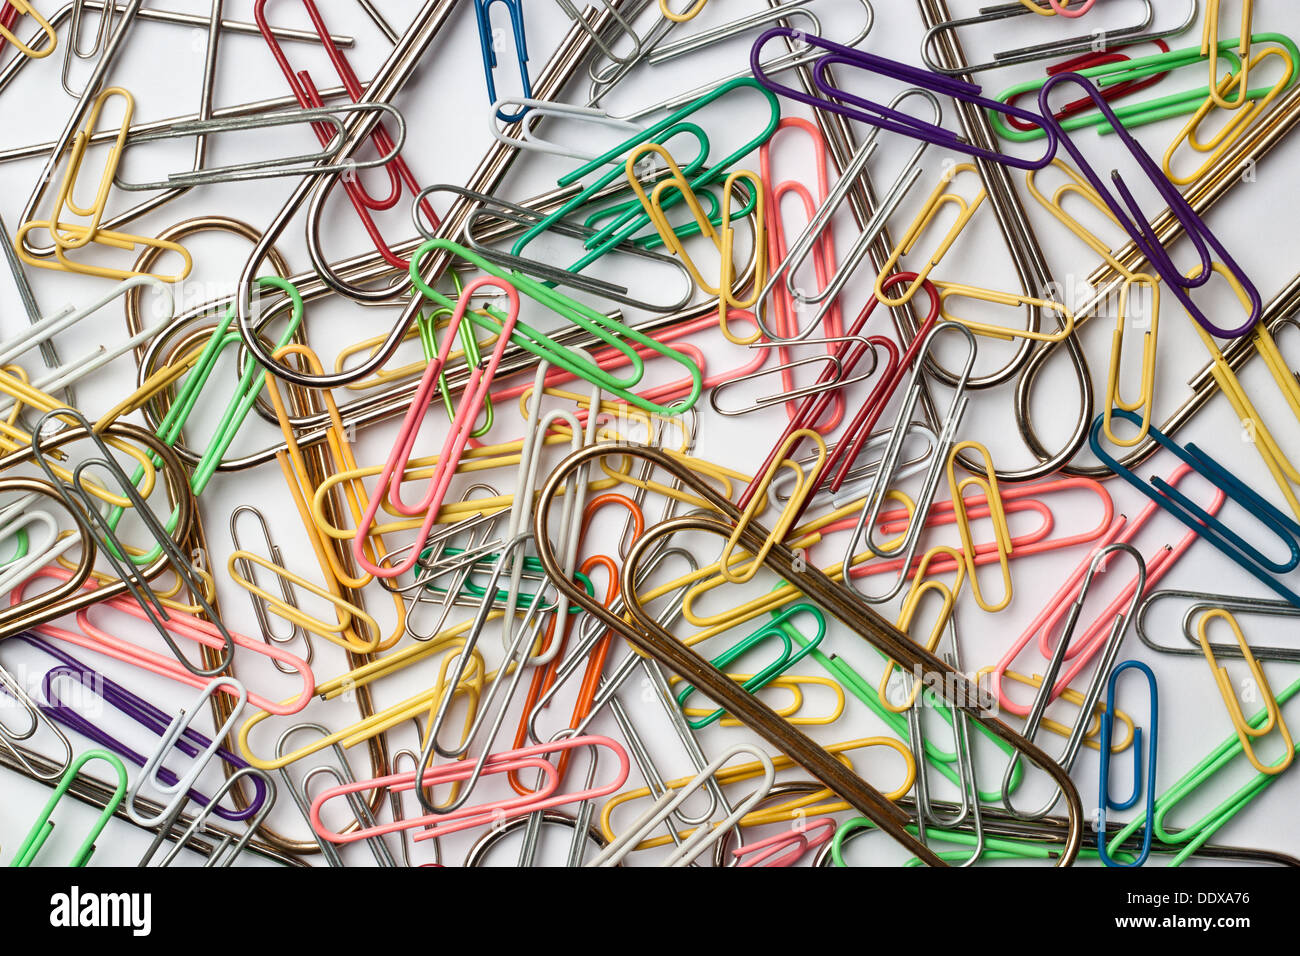 Assortment of paper clips on white surface Stock Photo